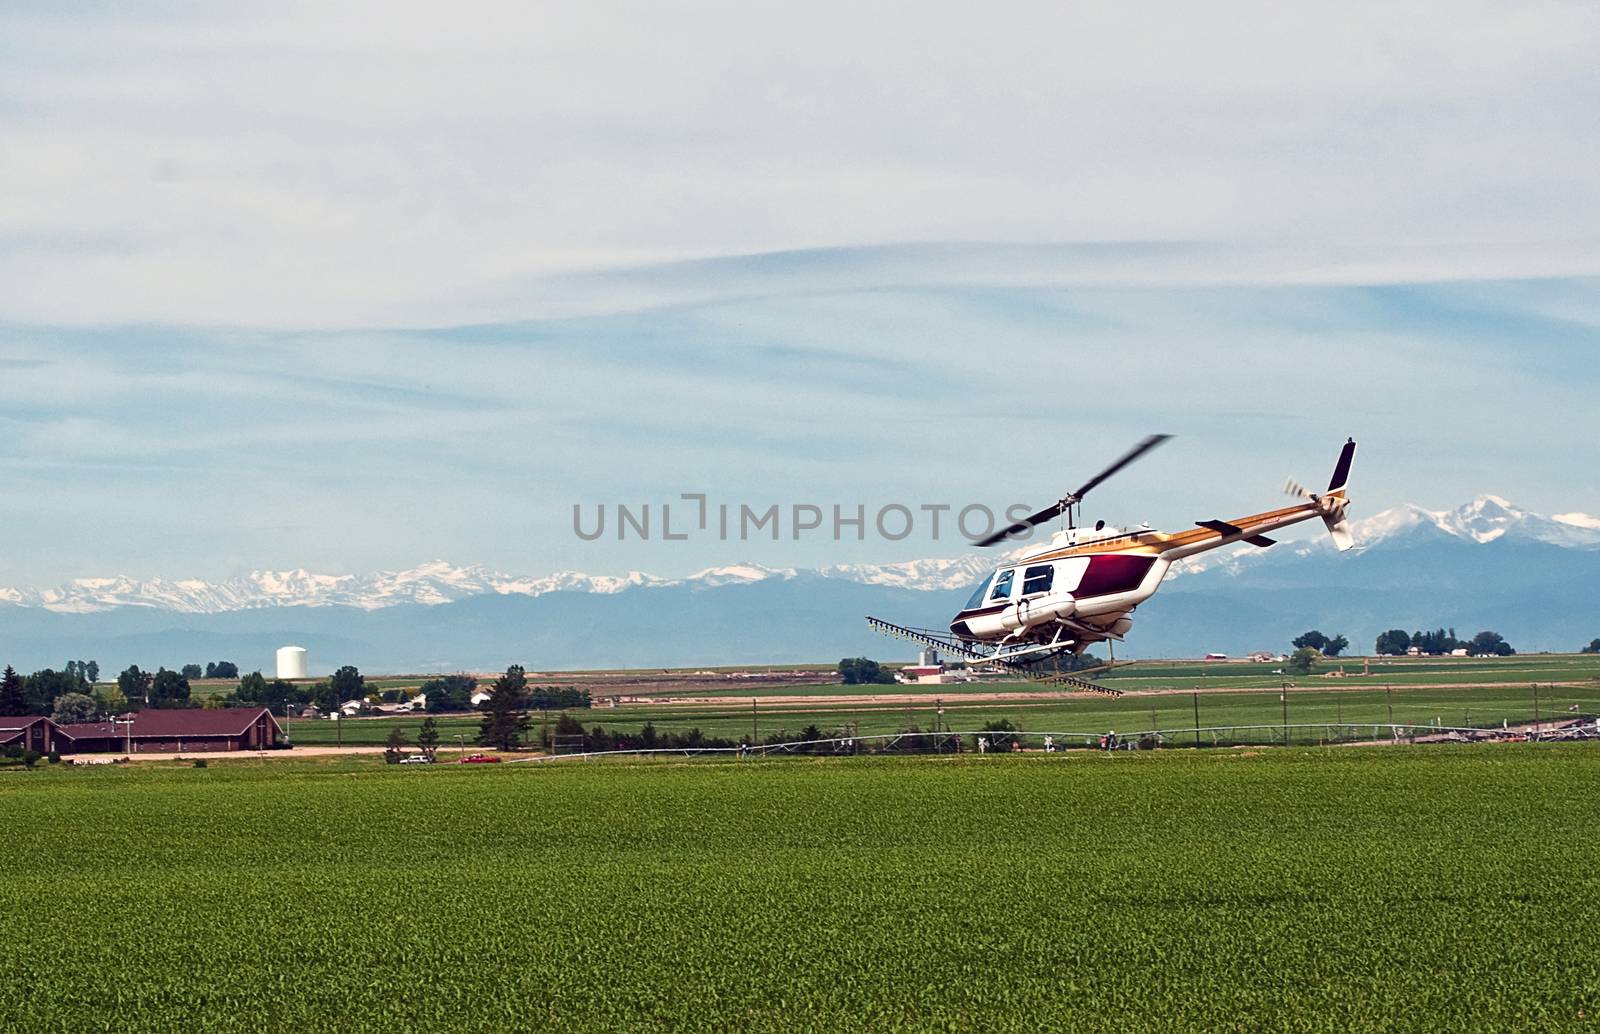 Helicopter used as a crop duster spraying insecticide on a cornfield in north central Colorado, USA.